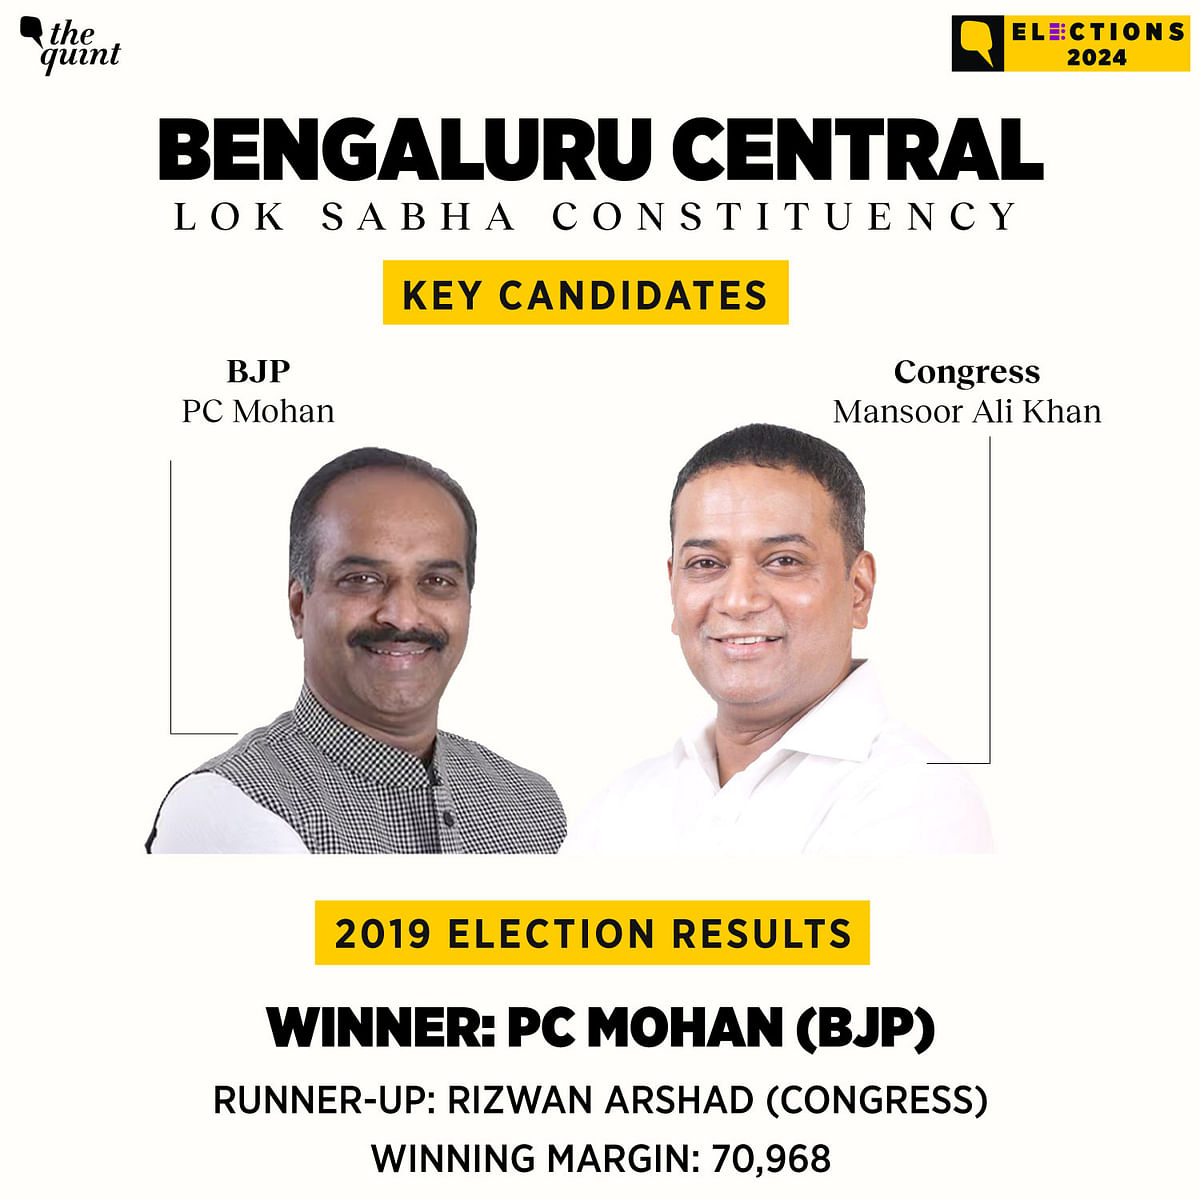 For nearly two decades, the BJP has dominated three of the four Lok Sabha seats across Bengaluru.